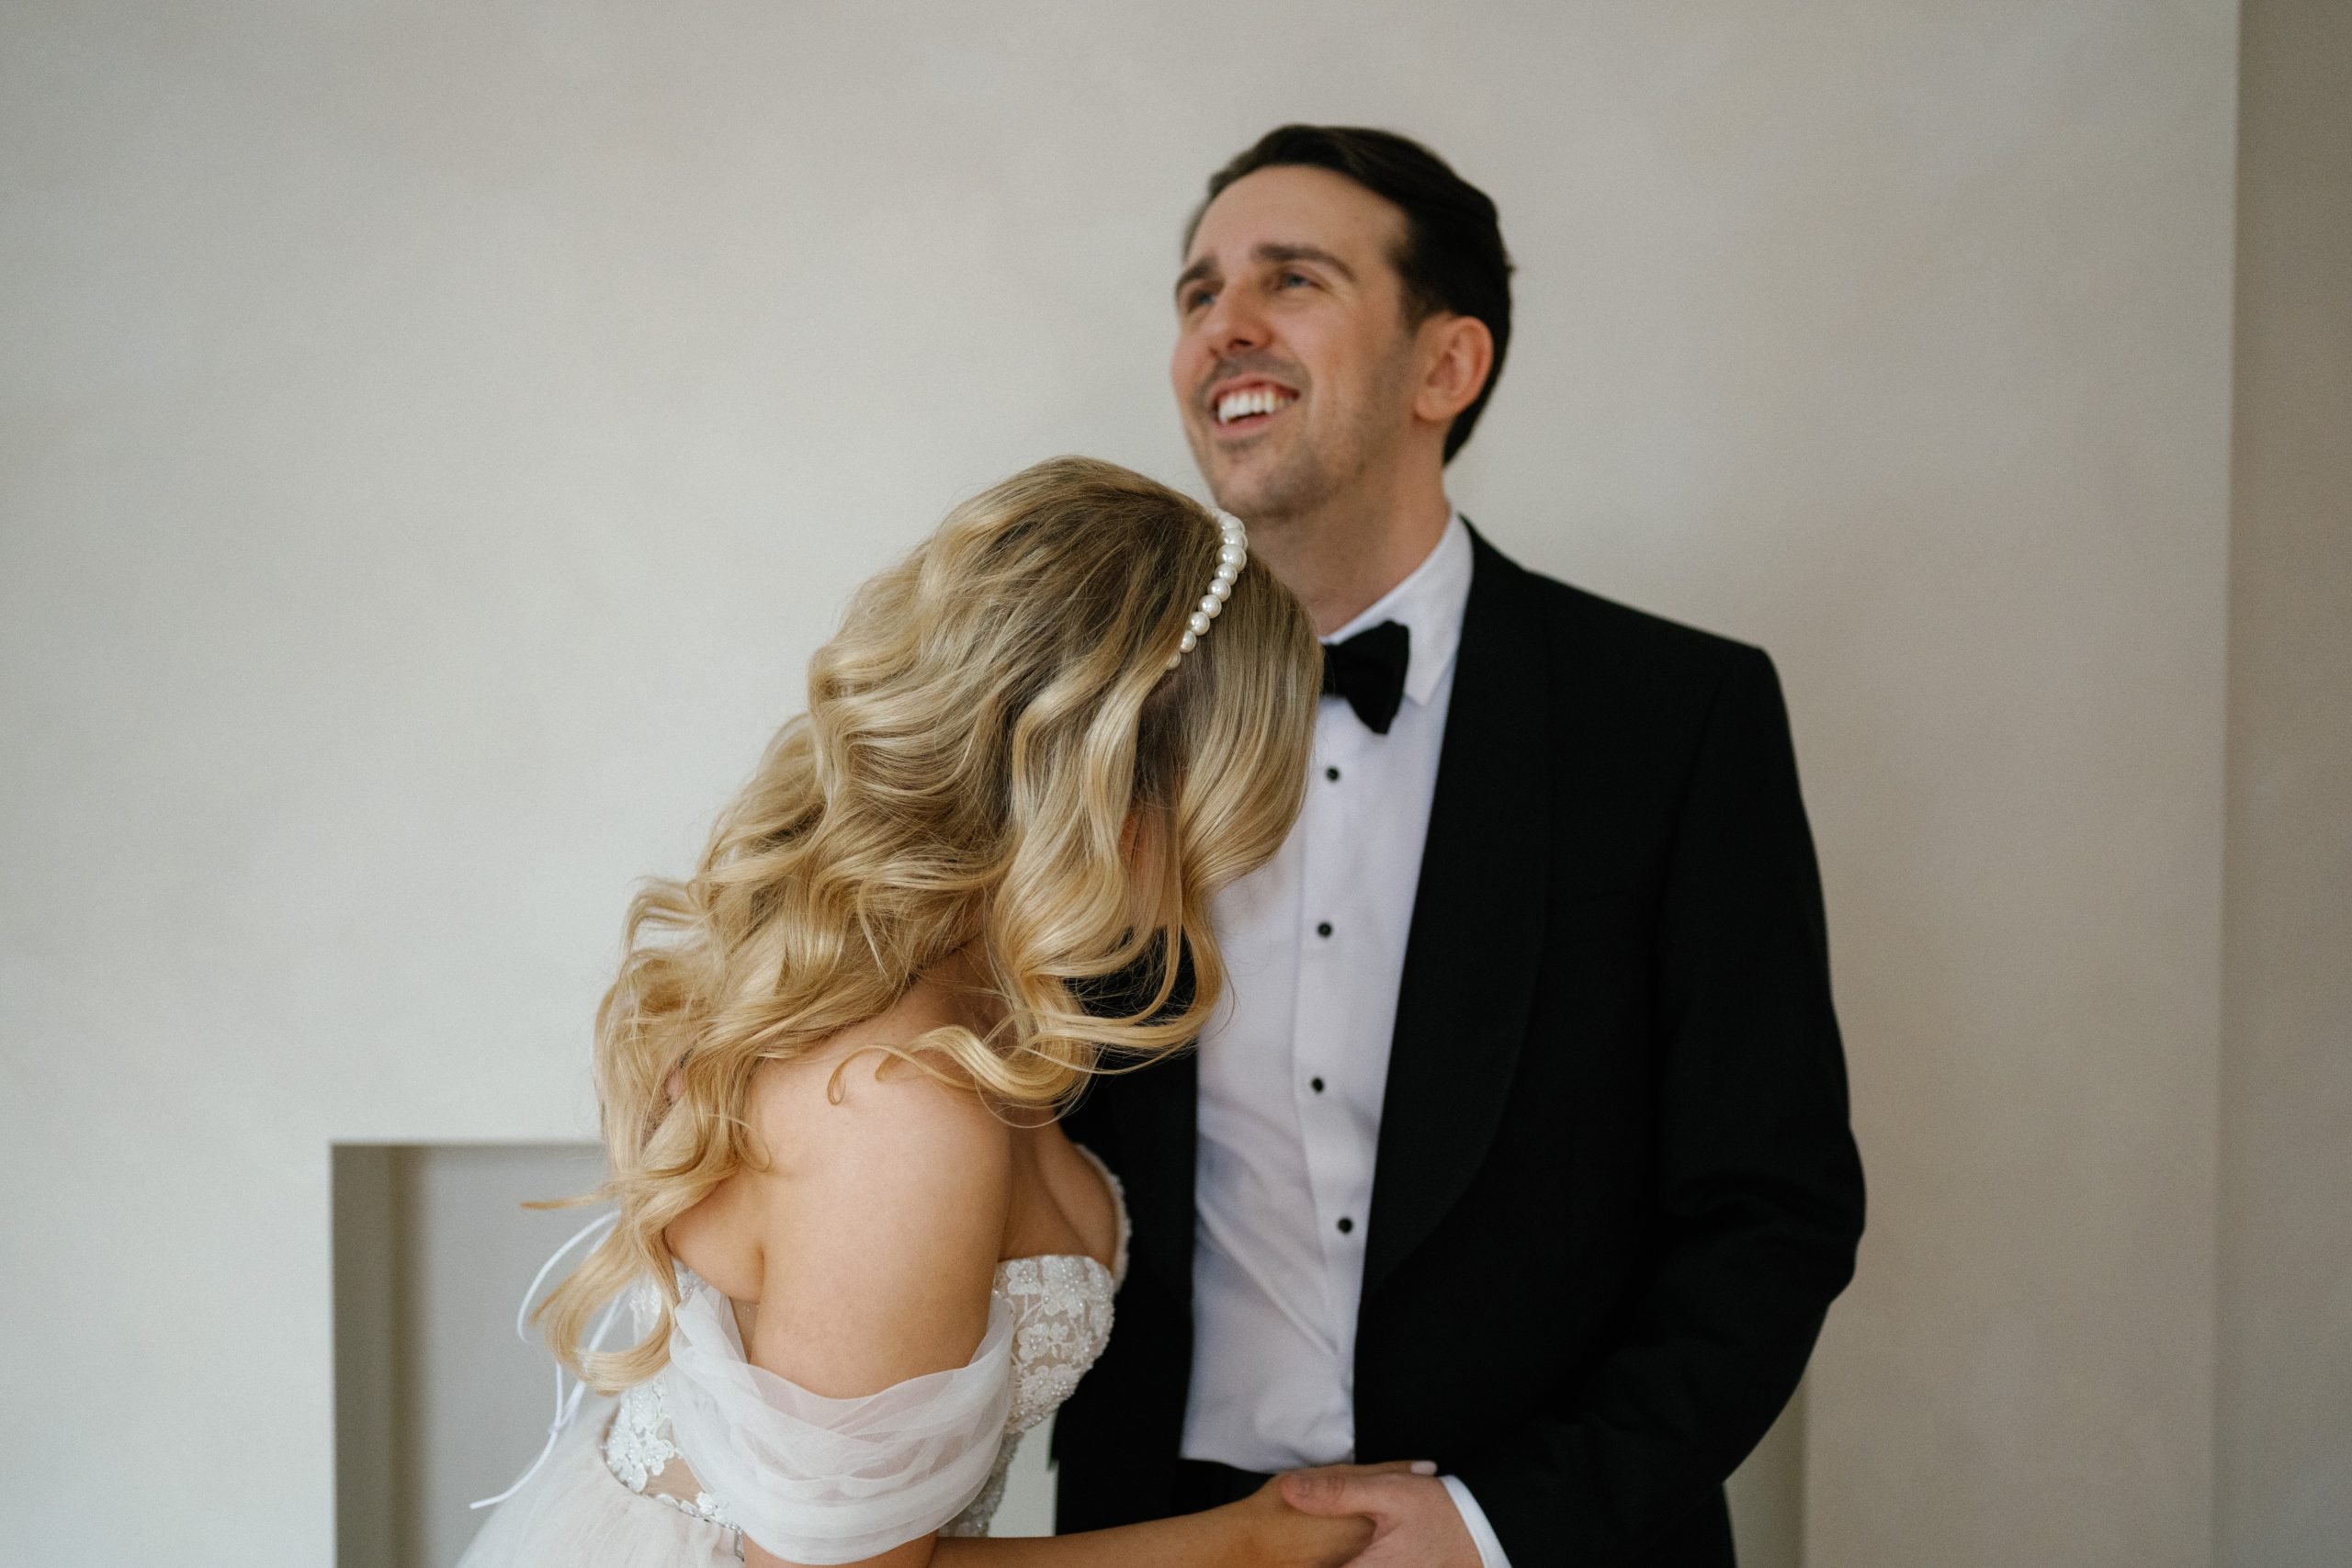 beautiful couple photos of bride and groom at Archive Studios